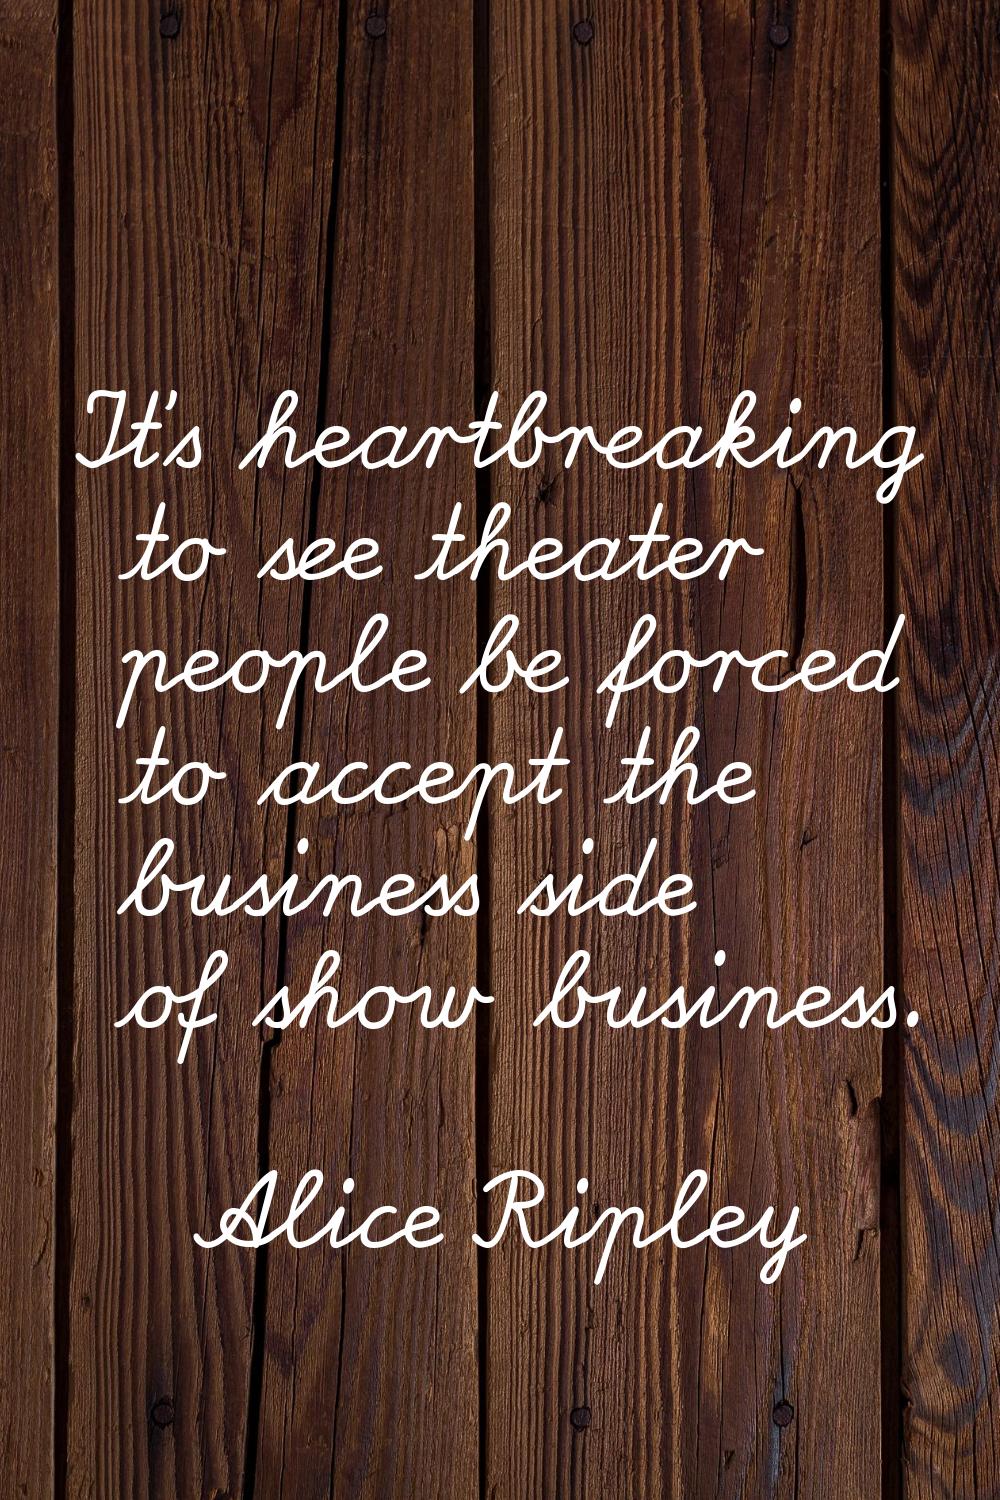 It's heartbreaking to see theater people be forced to accept the business side of show business.